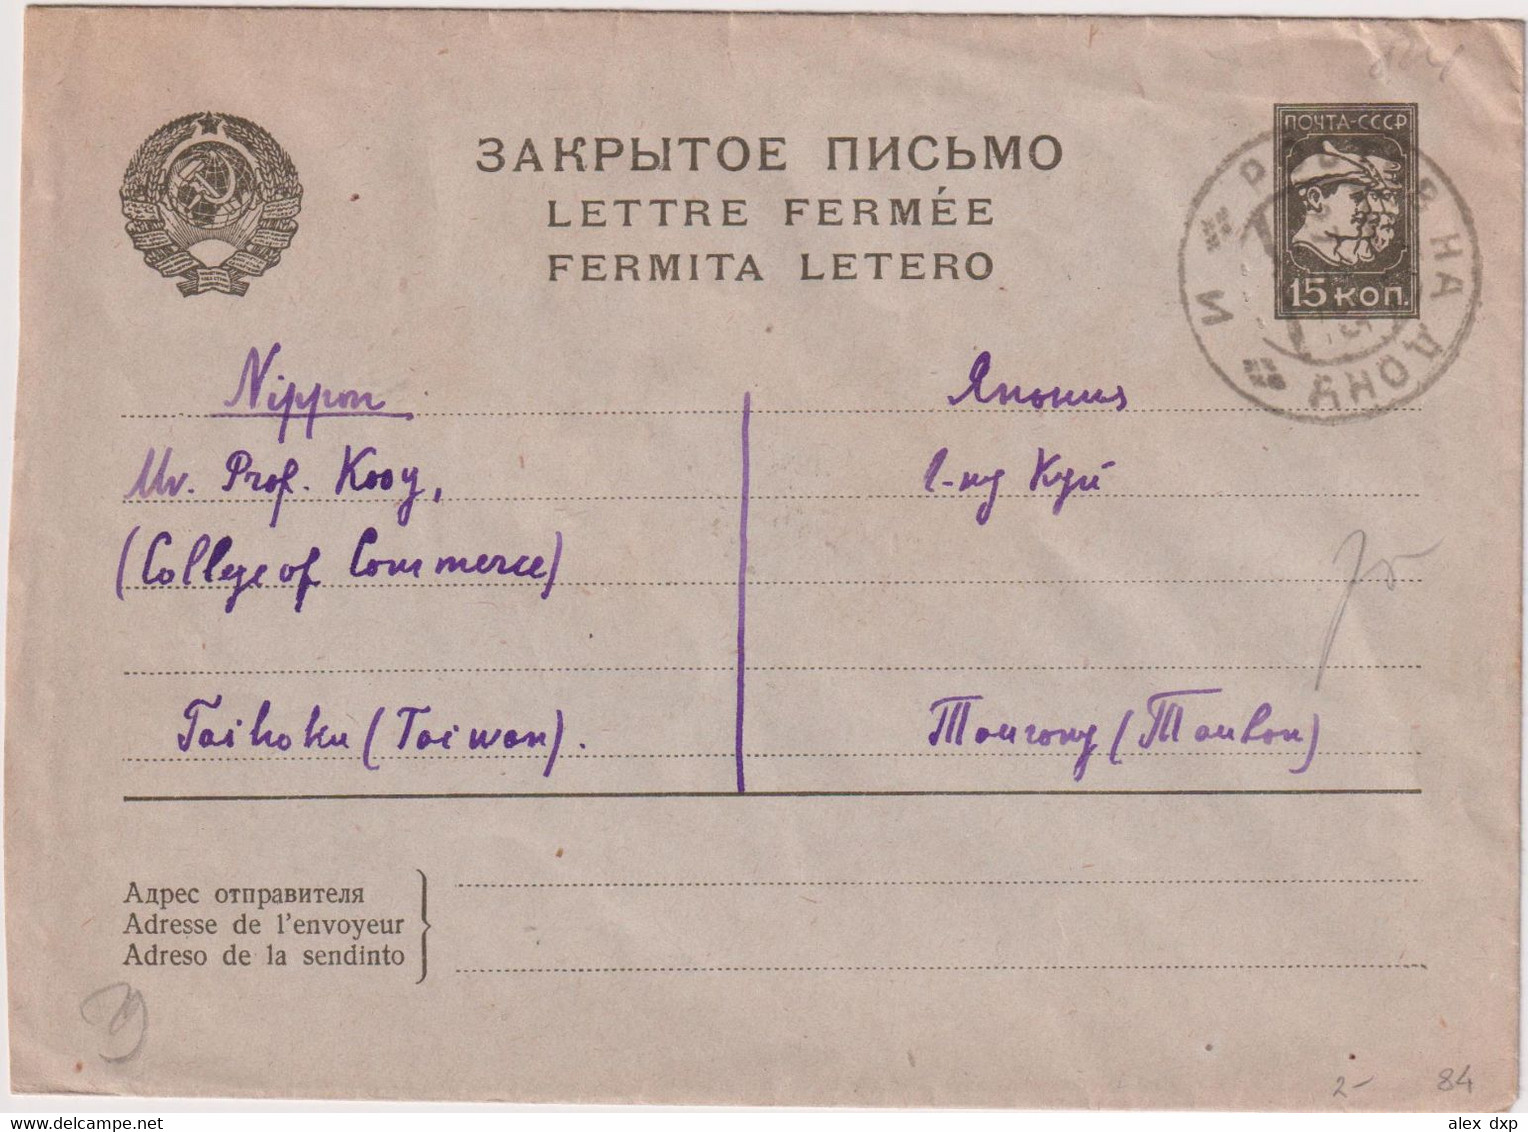 RUSSIA (USSR) > 1935 POSTAL HISTORY > CLOSED LETTER STATIONARY COVER TO TAIWAN (PERIOD OF JAPANESE OCCUPATION) - Covers & Documents